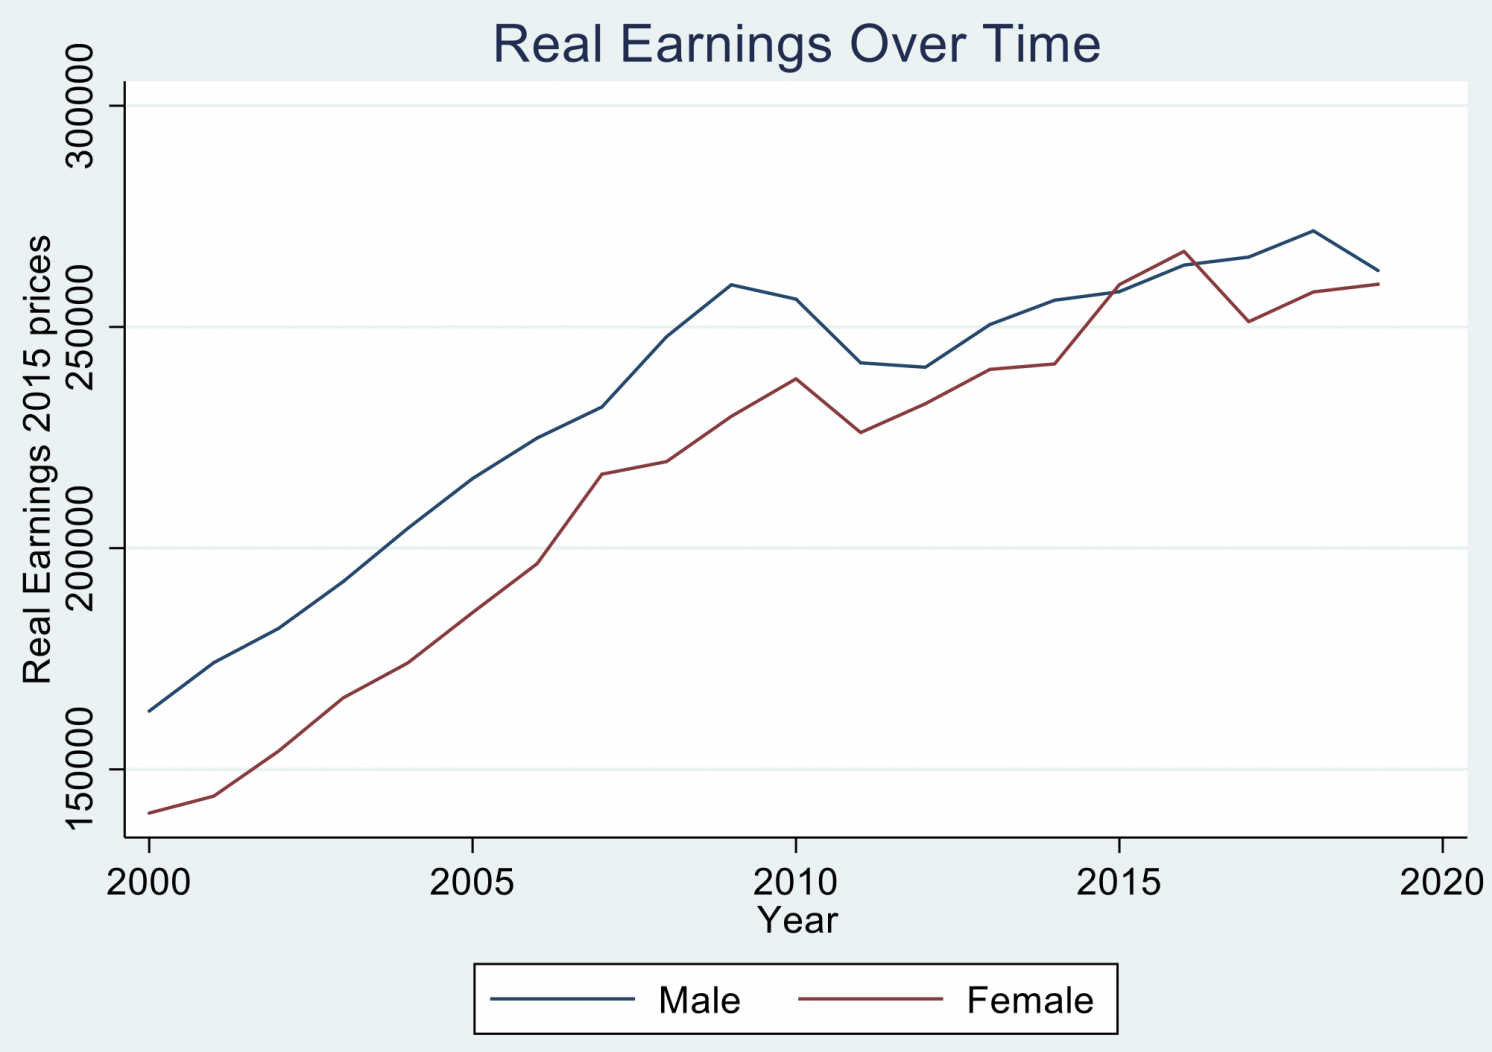 Real earnings (2015 prices) over time among male and female Vice Chancellors